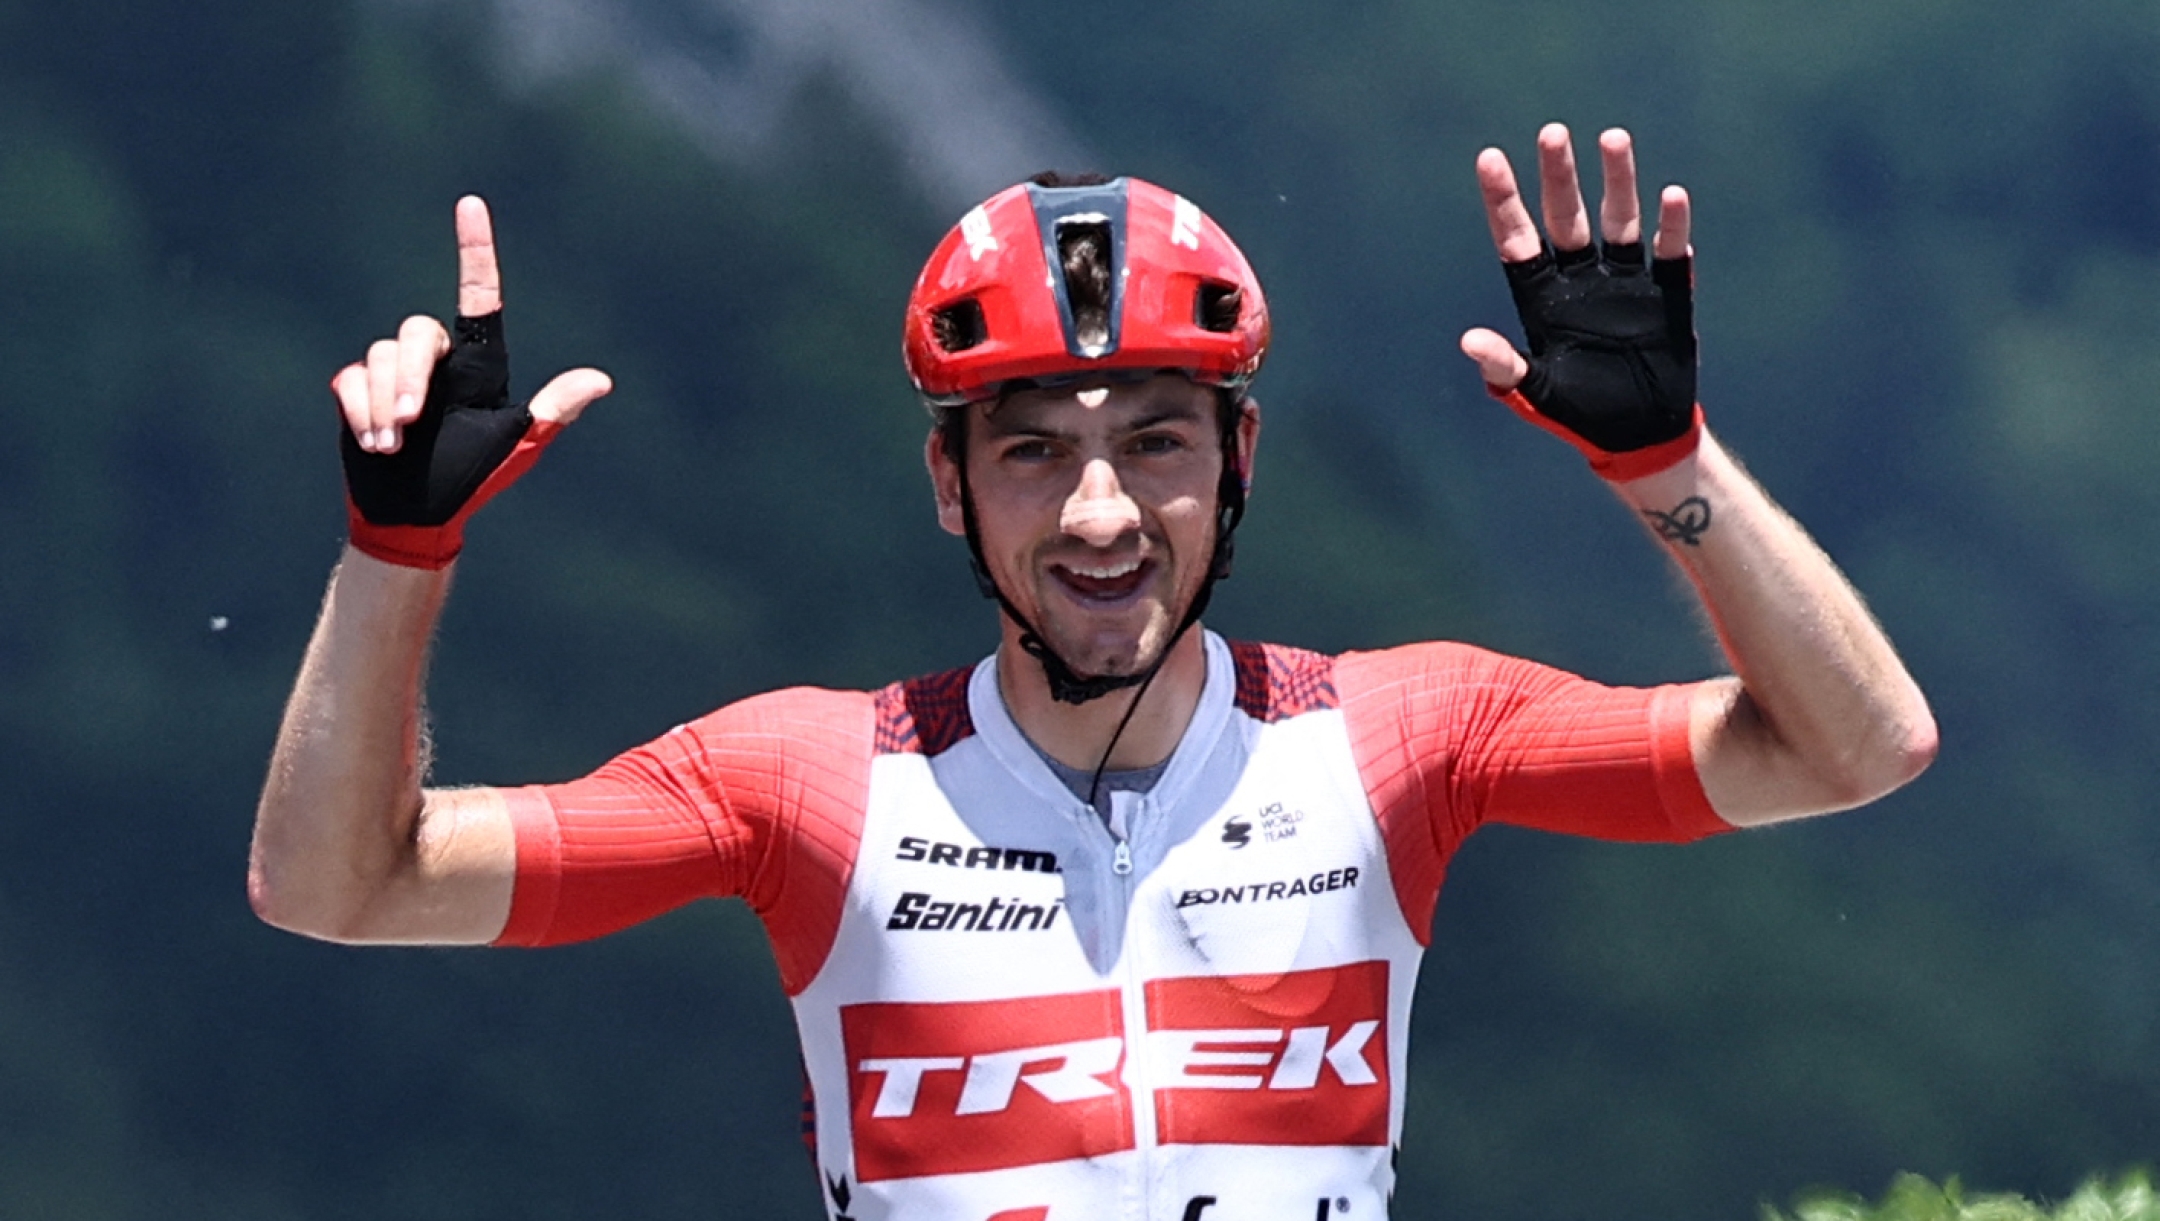 TOPSHOT - Trek - Segafredo's Italian rider Giulio Ciccone celebrates as he crosses the finish line to win the eighth stage of the 75th edition of the Criterium du Dauphine cycling race, 153km between Le Pont-de-Claix city to La Bastille in Grenoble, France, on June 11, 2023. (Photo by Anne-Christine POUJOULAT / AFP)